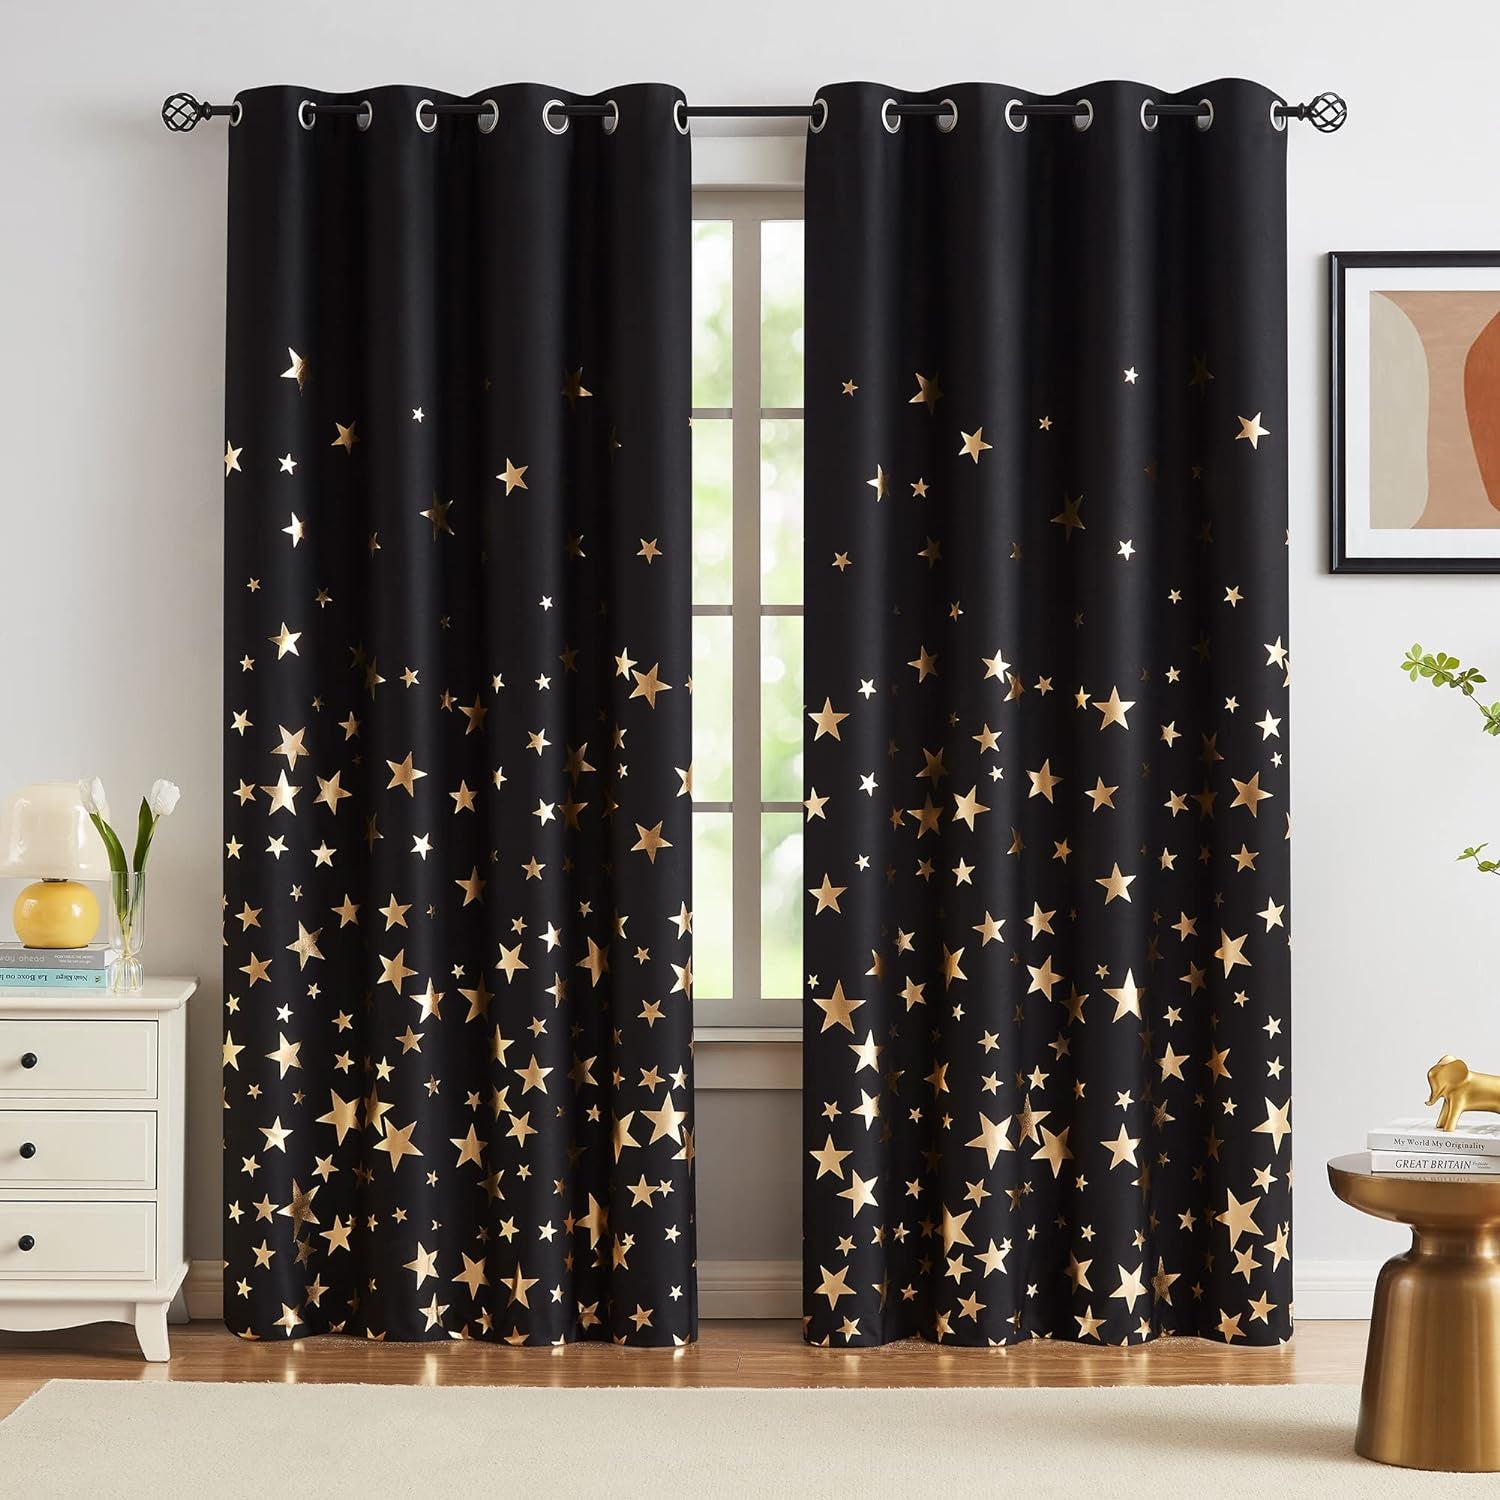 Pink Full Blackout Curtains for Girl'S Room Gold Metallic Medallion Curtain Drapes for Studio Dorm Modern Sparking Thermal Window Curtains for Bedroom Living Room 63Inch 2 Panels Grommet Top  Treatmentex   